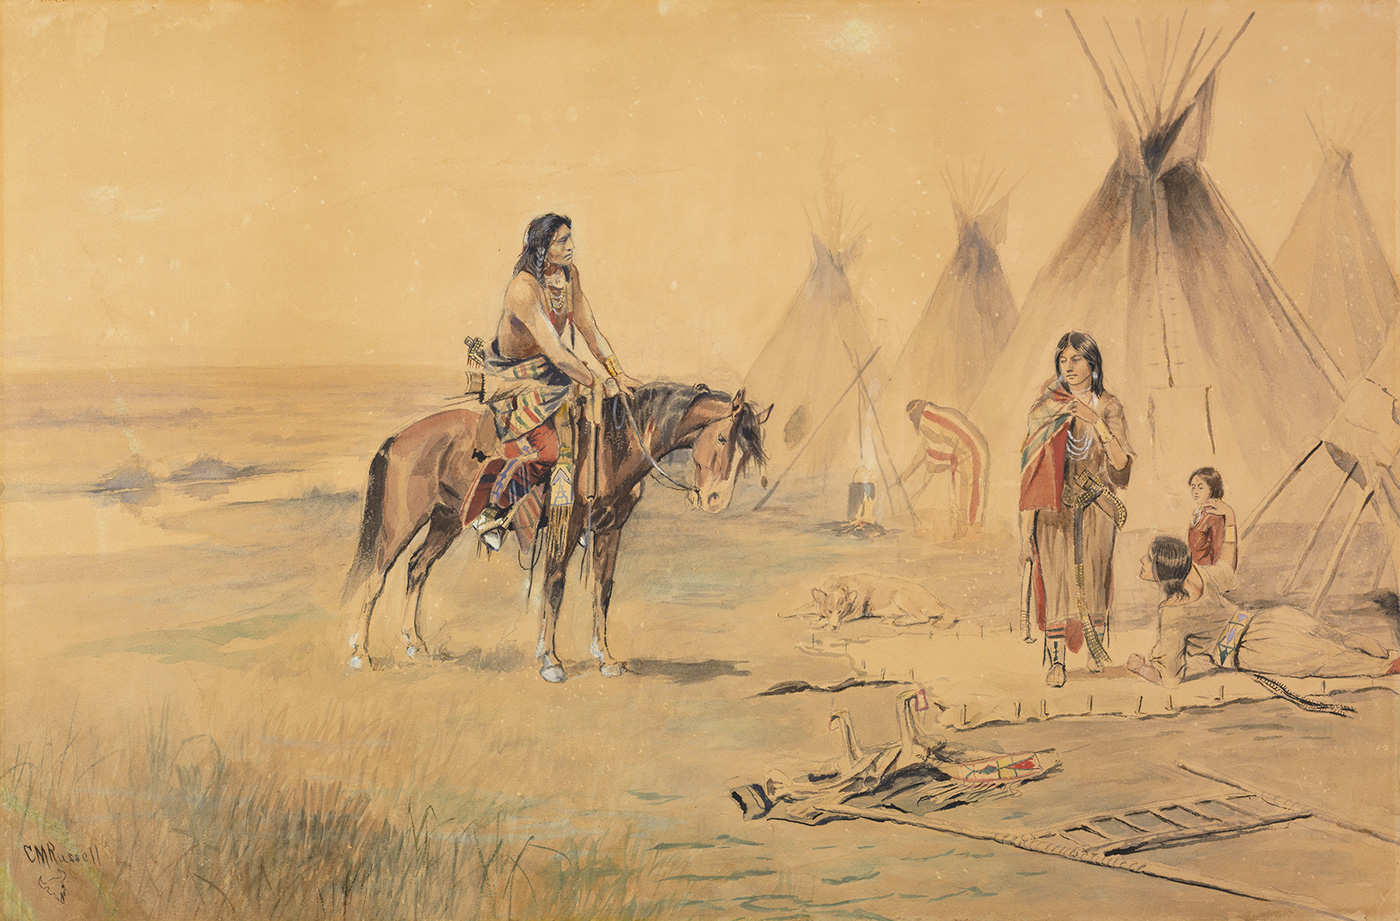 An indigenous American man on a horse is in front of two indigenous American women at work in front of tipis.